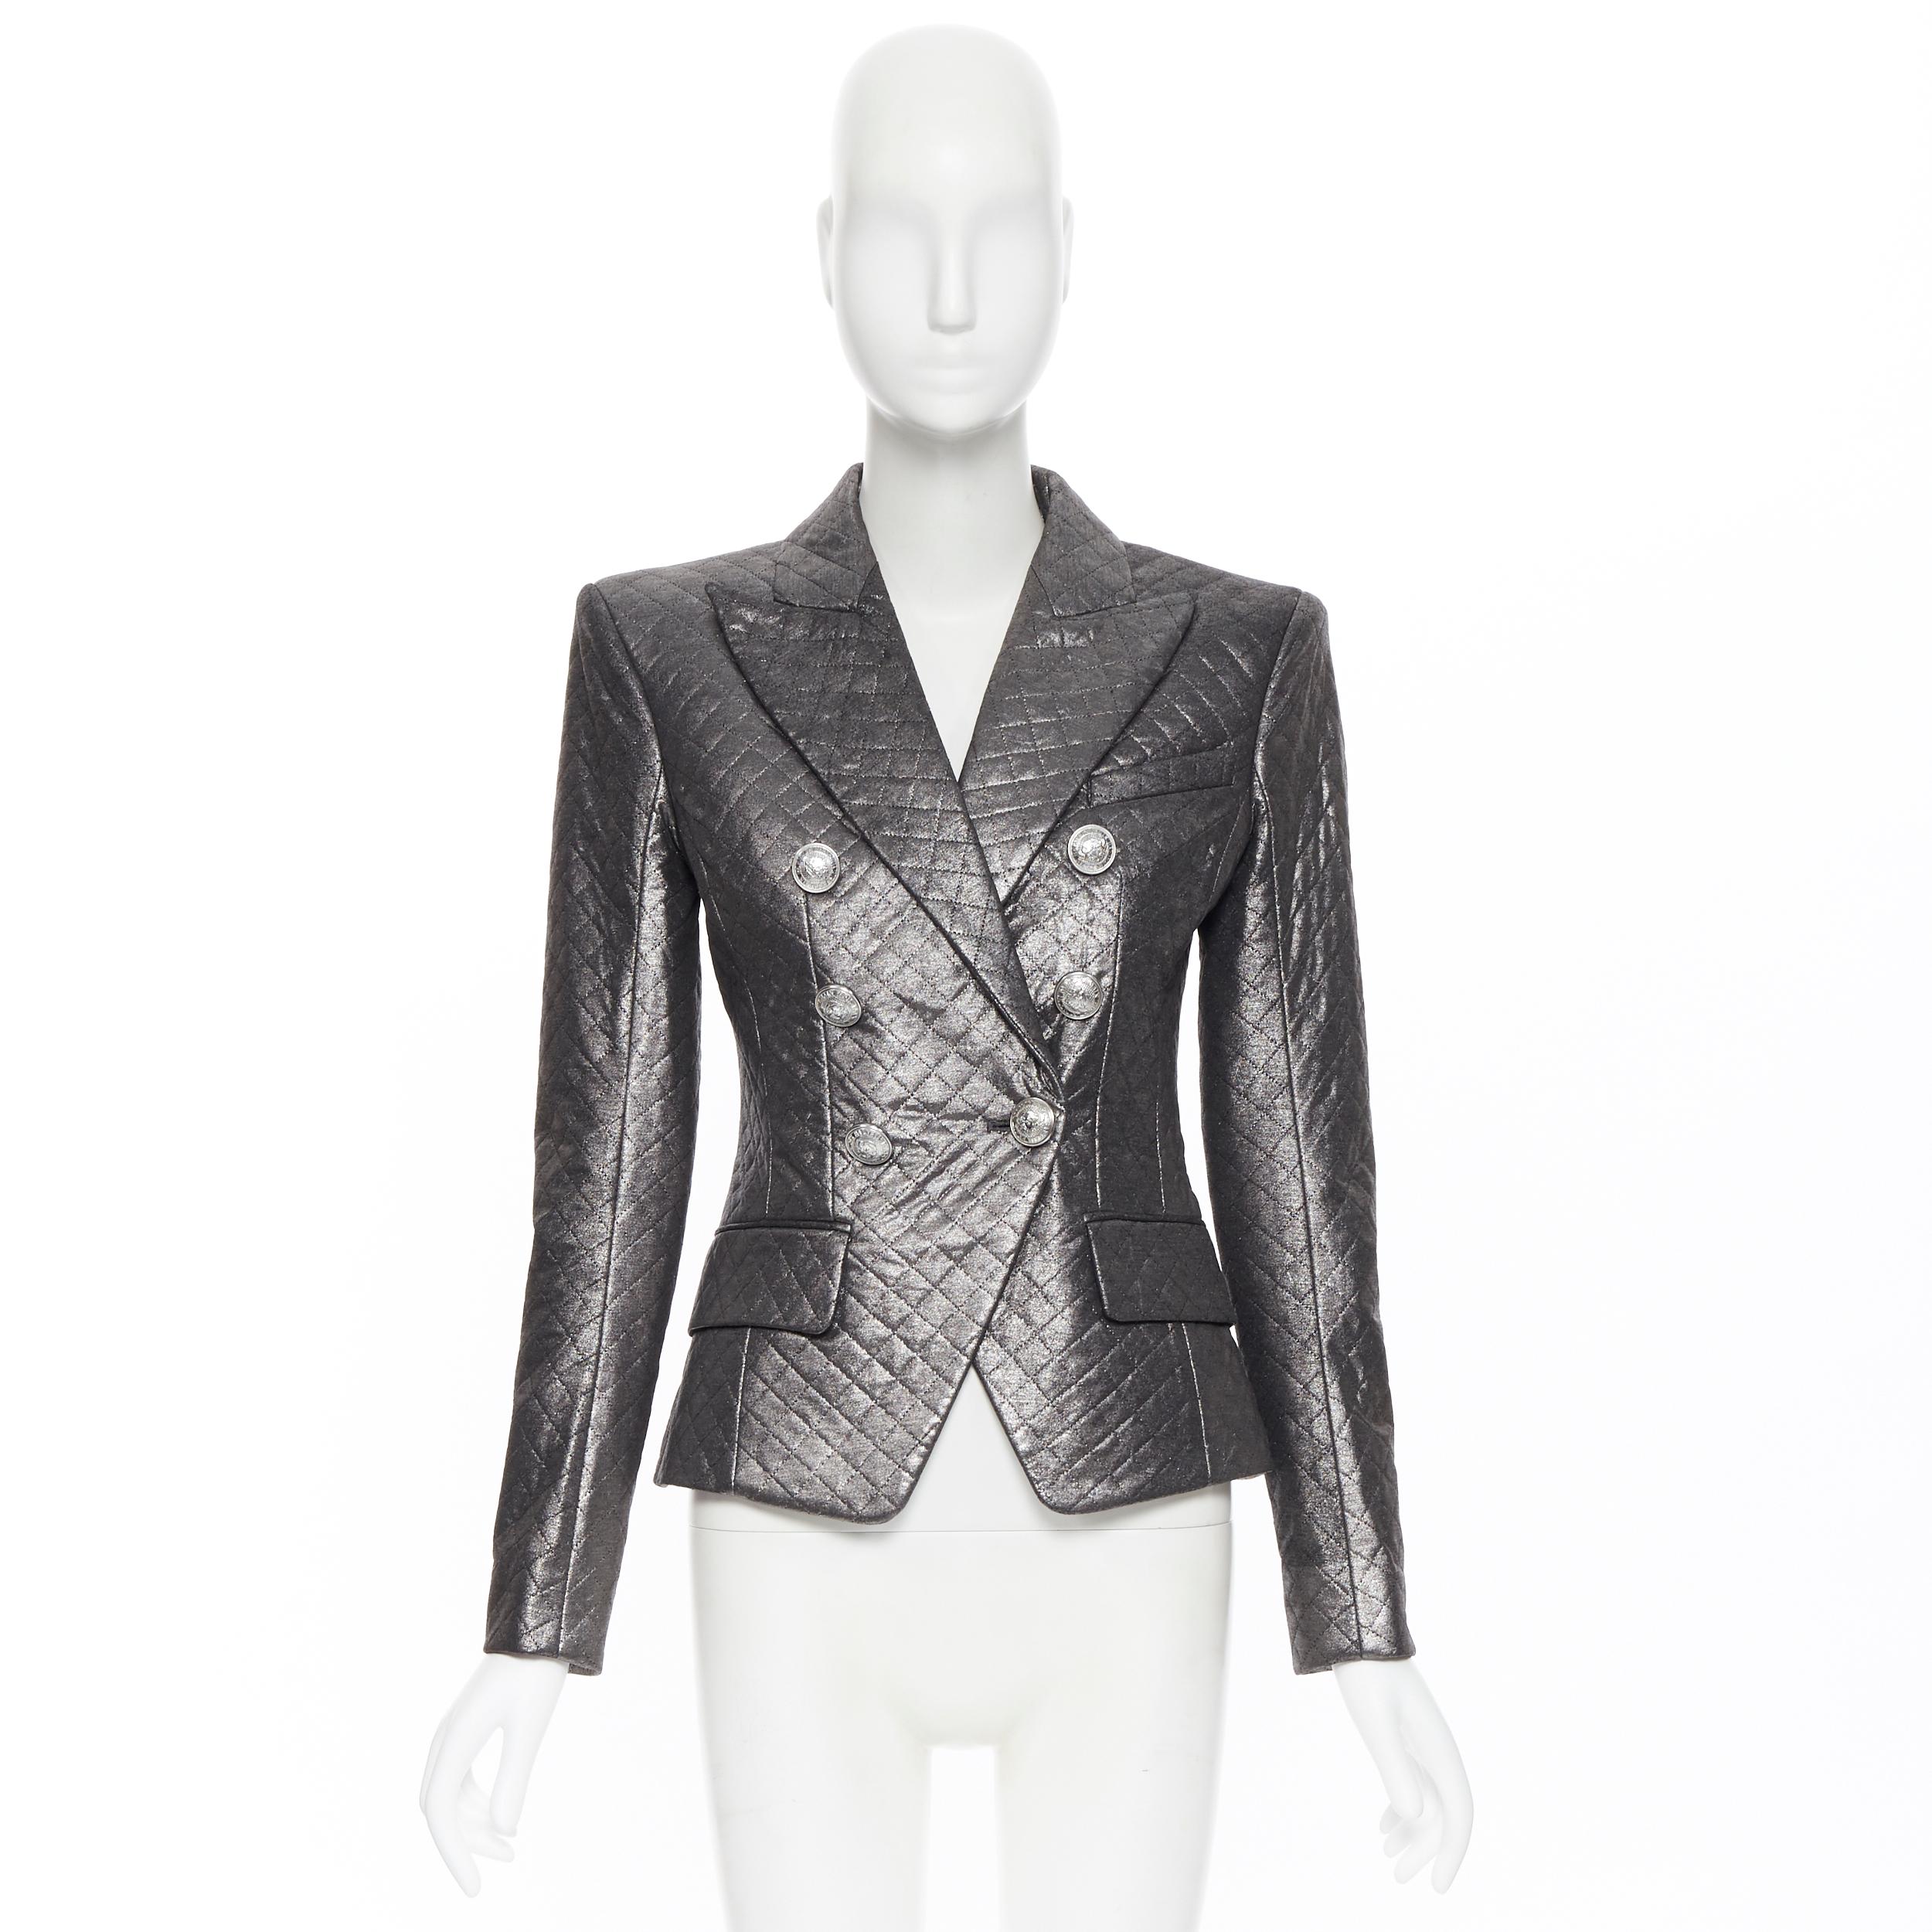 new BALMAIN gunmetal silver quilted military double breasted blazer jacket FR34
Brand: Balmain
Designer: Olivier Rousteing
Model Name / Style: Double breasted jacket
Material: Viscose
Color: Silver
Pattern: Solid
Closure: Button
Extra Detail: A